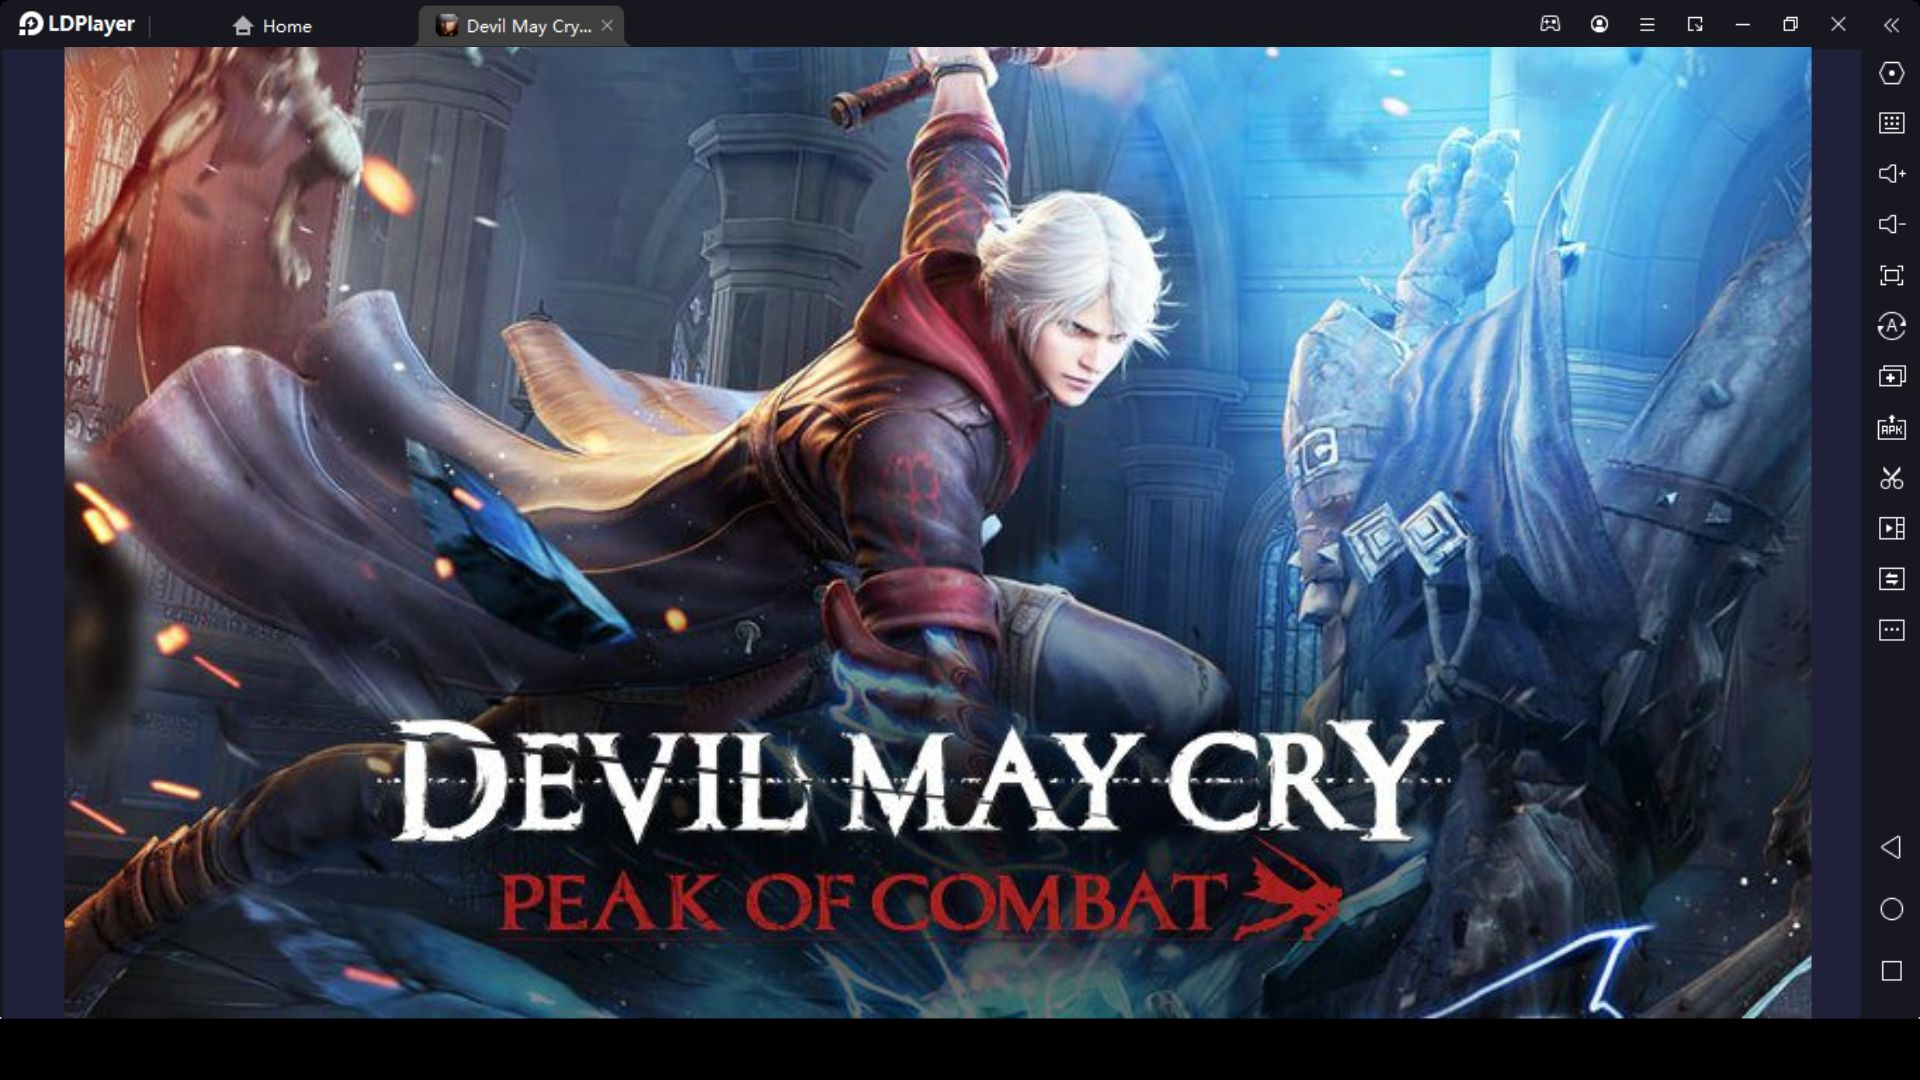 Devil May Cry: Peak of Combat is released on mobile